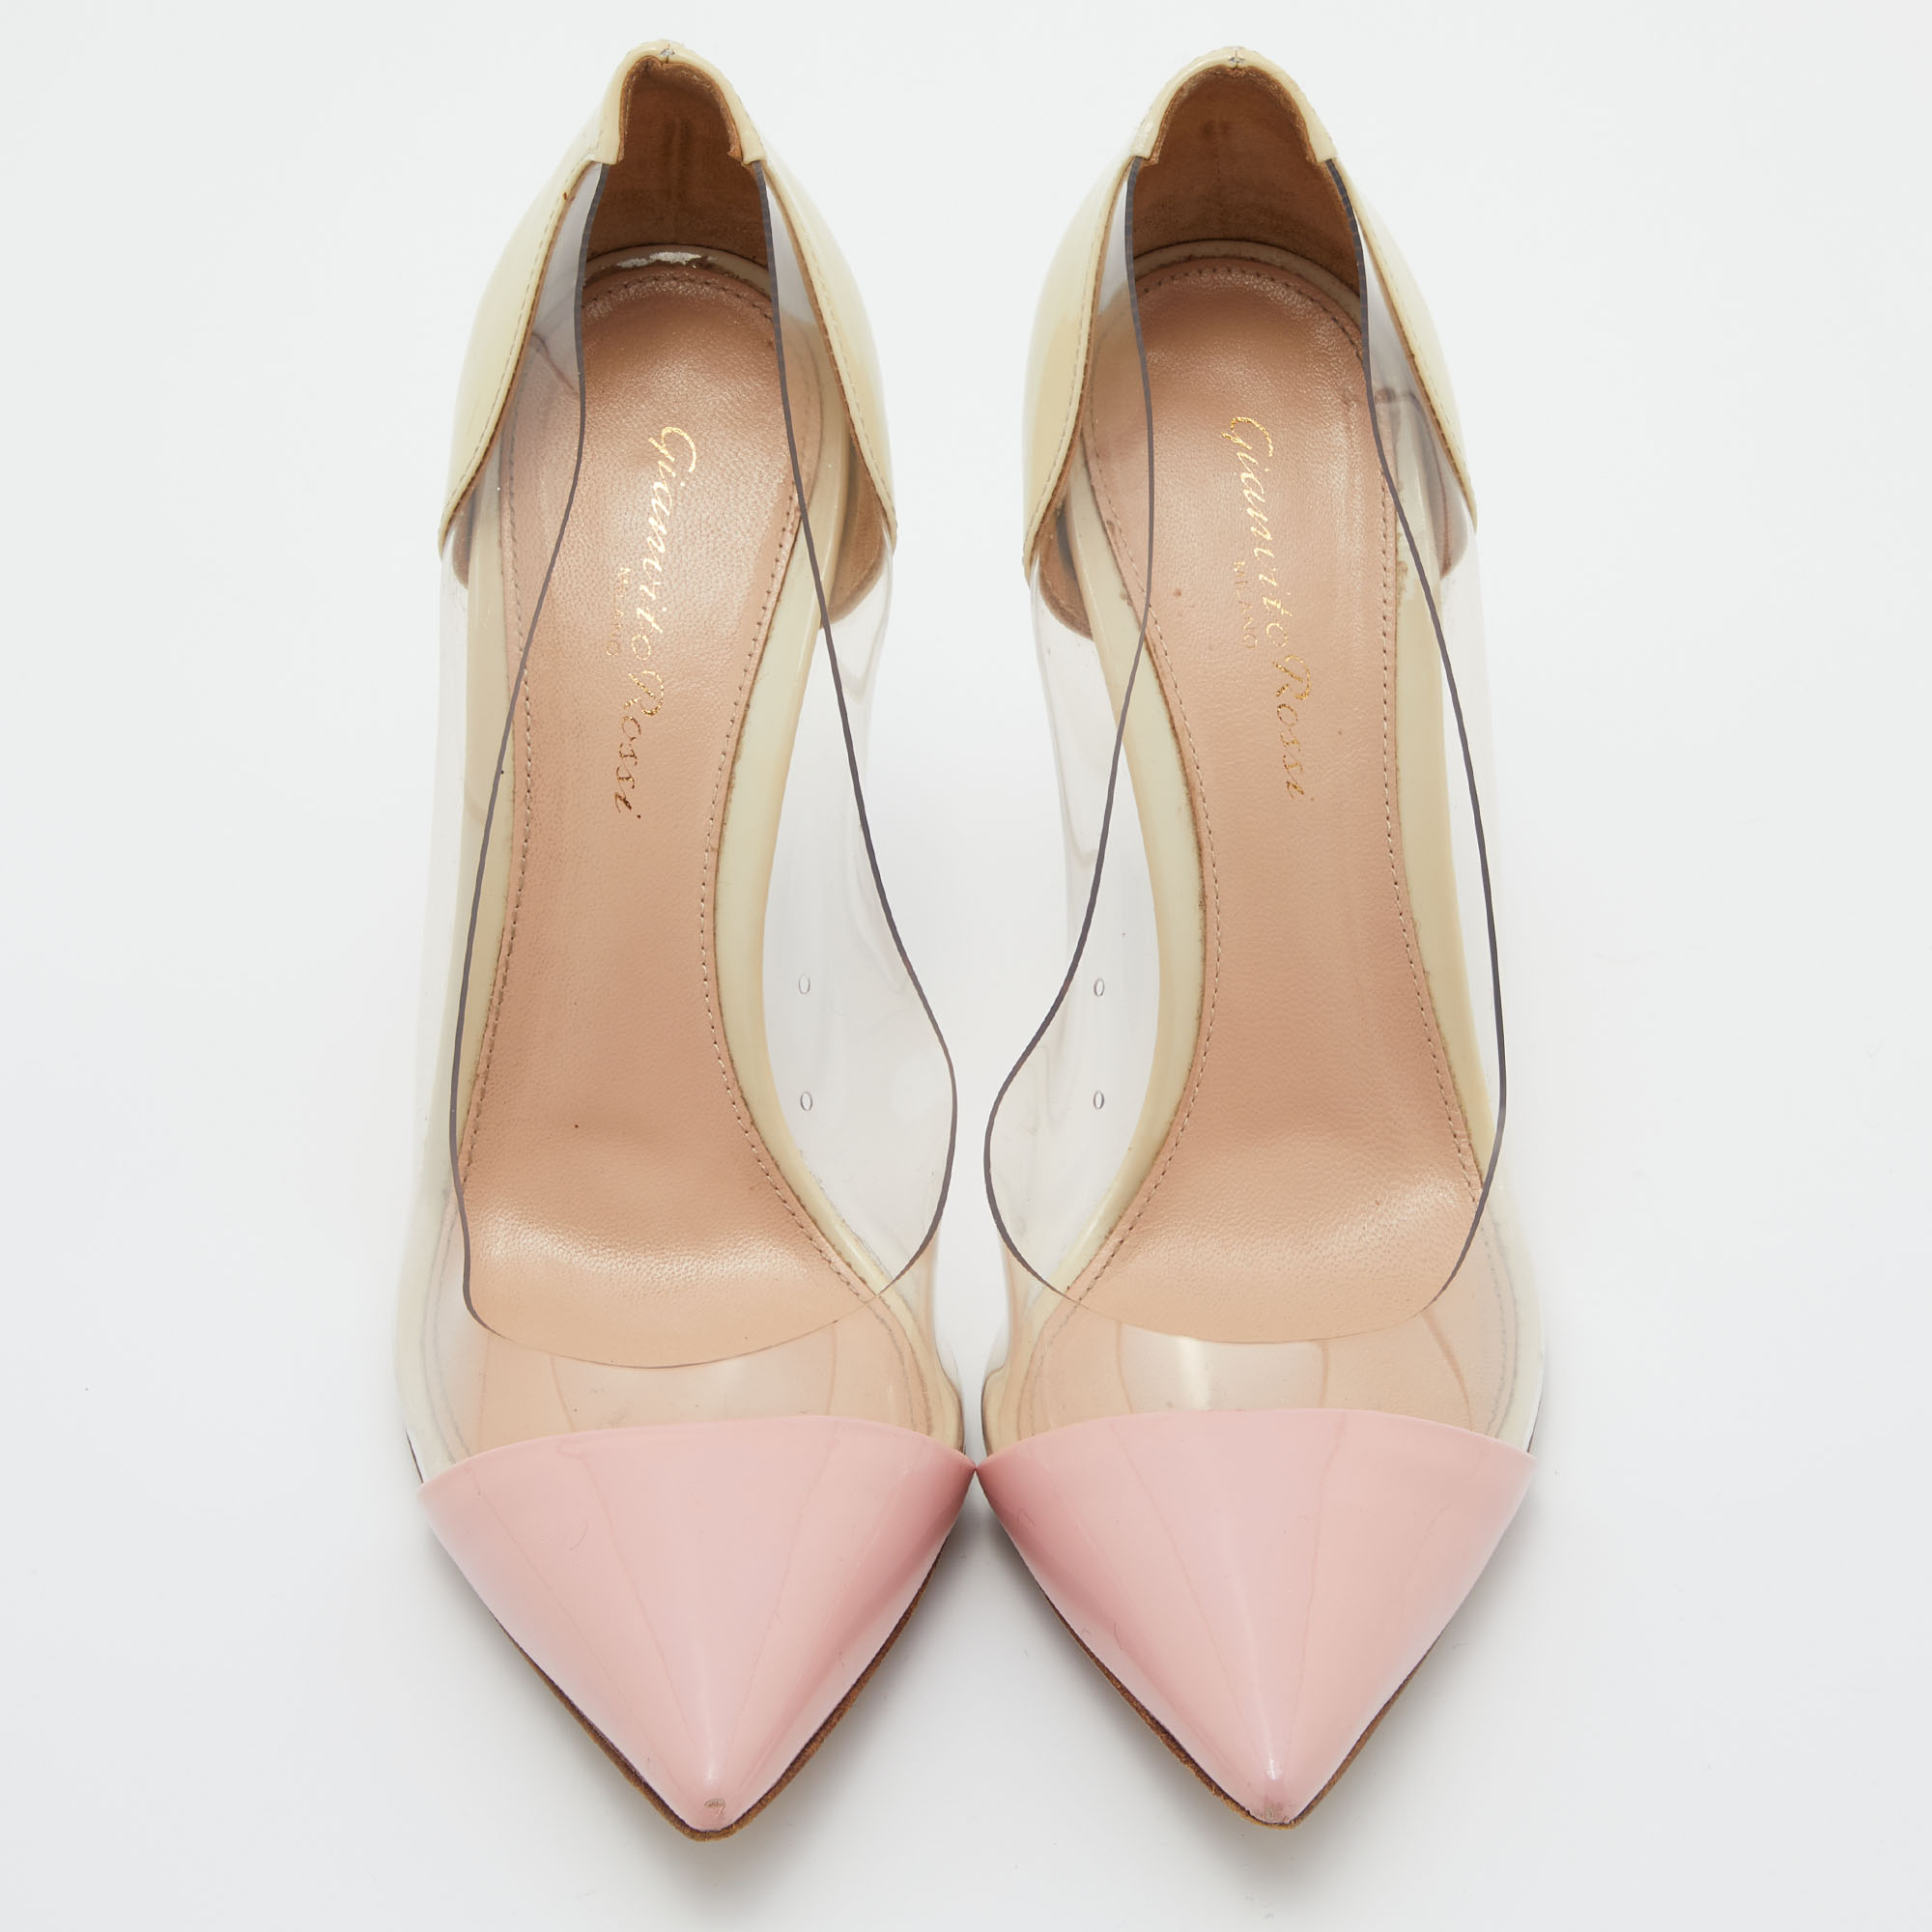 Gianvito Rossi Light Yellow/Pink Patent Leather And PVC Plexi Pumps Size 38